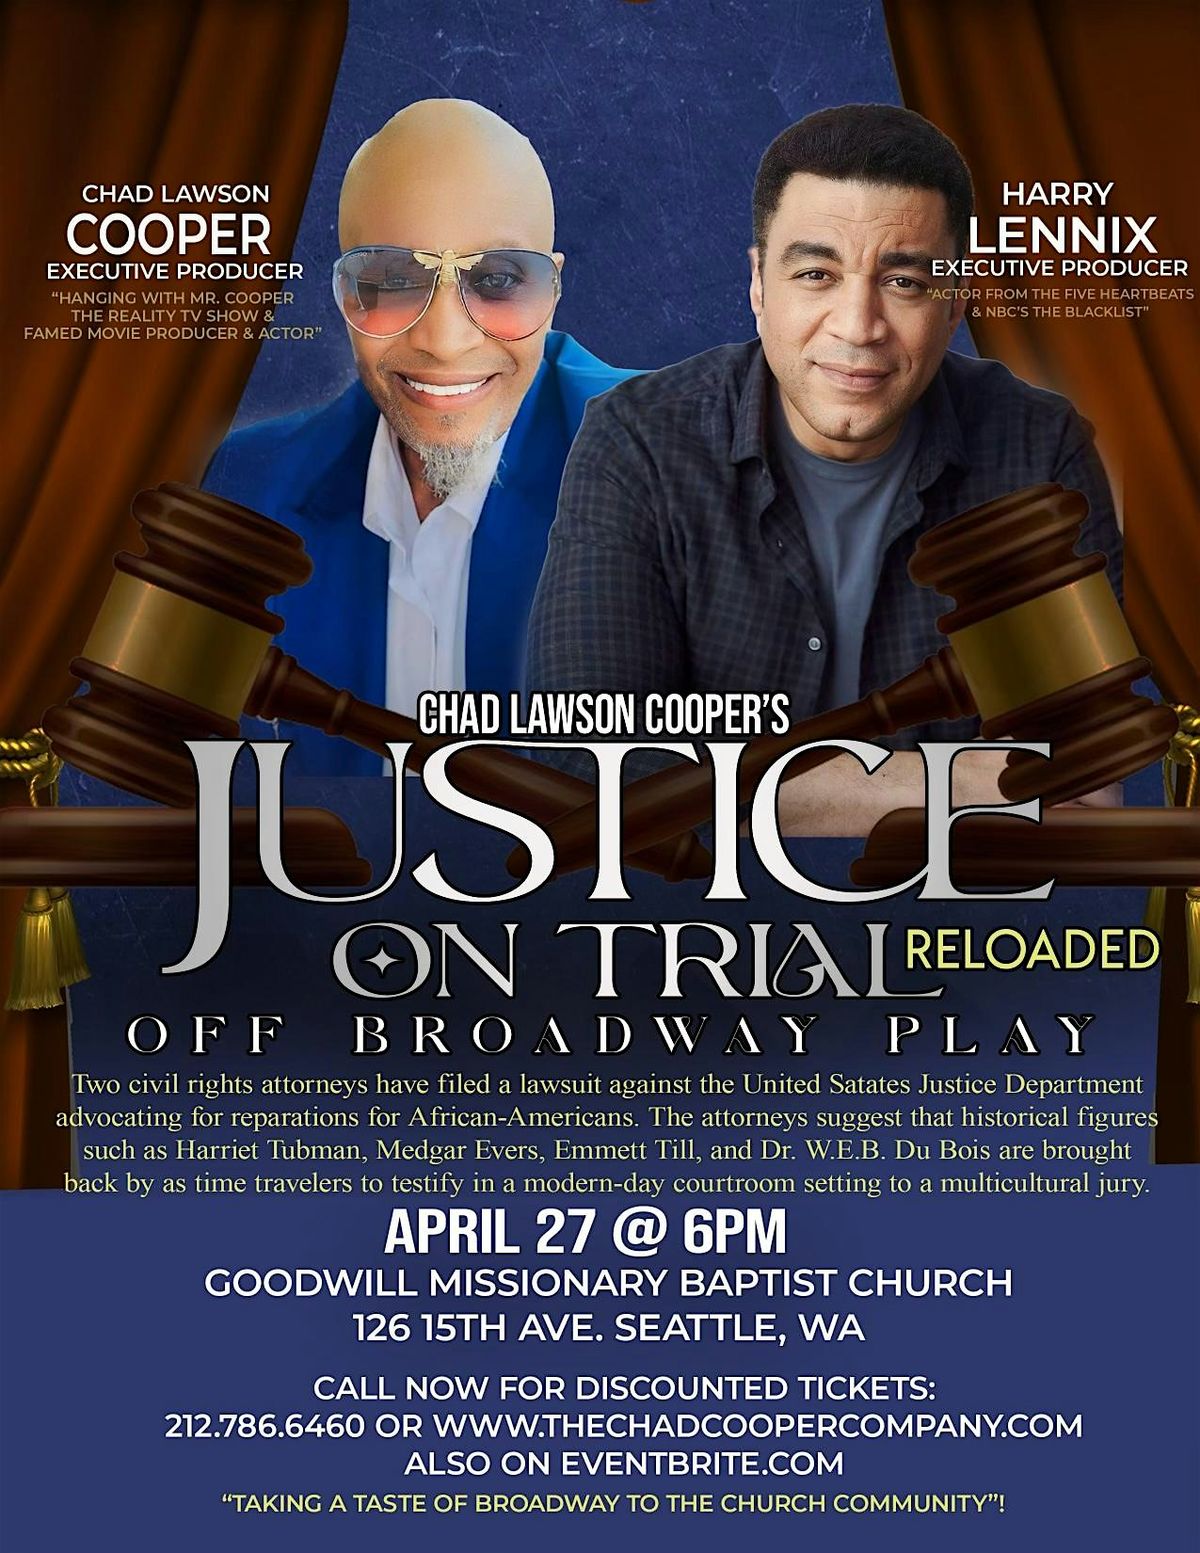 Chad Lawson Cooper\u2019s Justice on Trial Touring Off-Broadway Play - Seattle